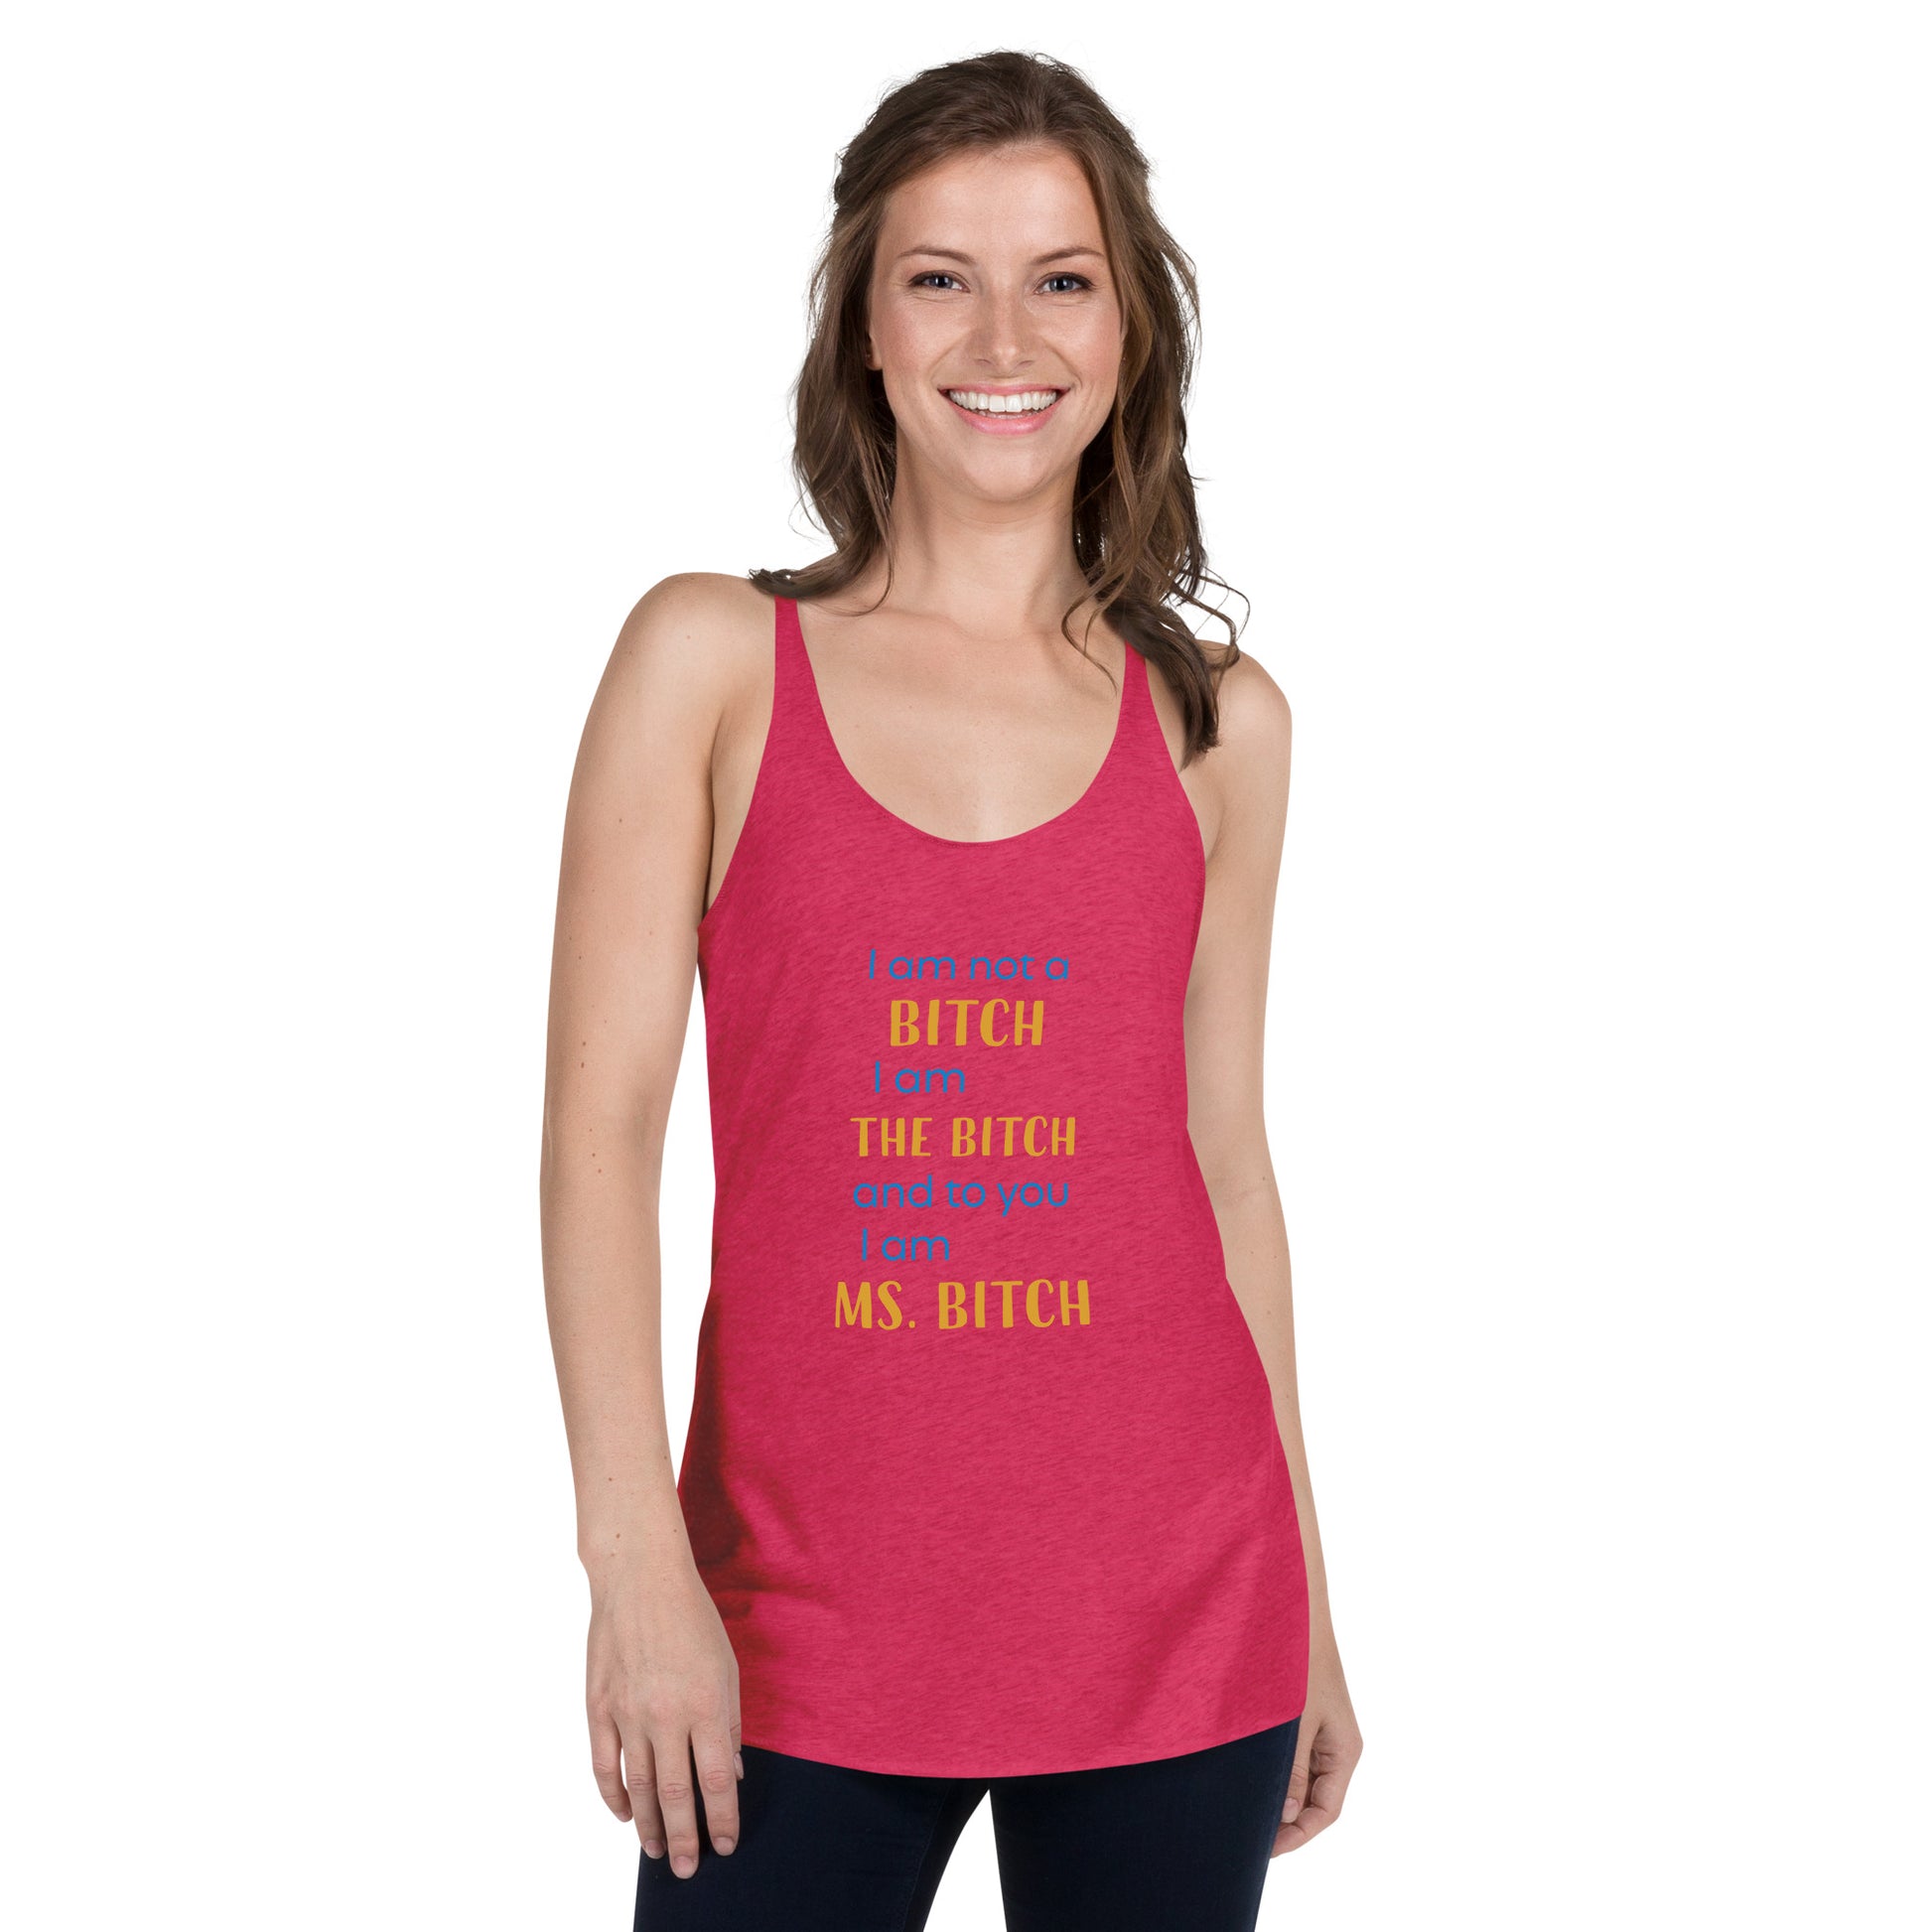 Women with pink tank top with the text "to you I'm MS bitch"